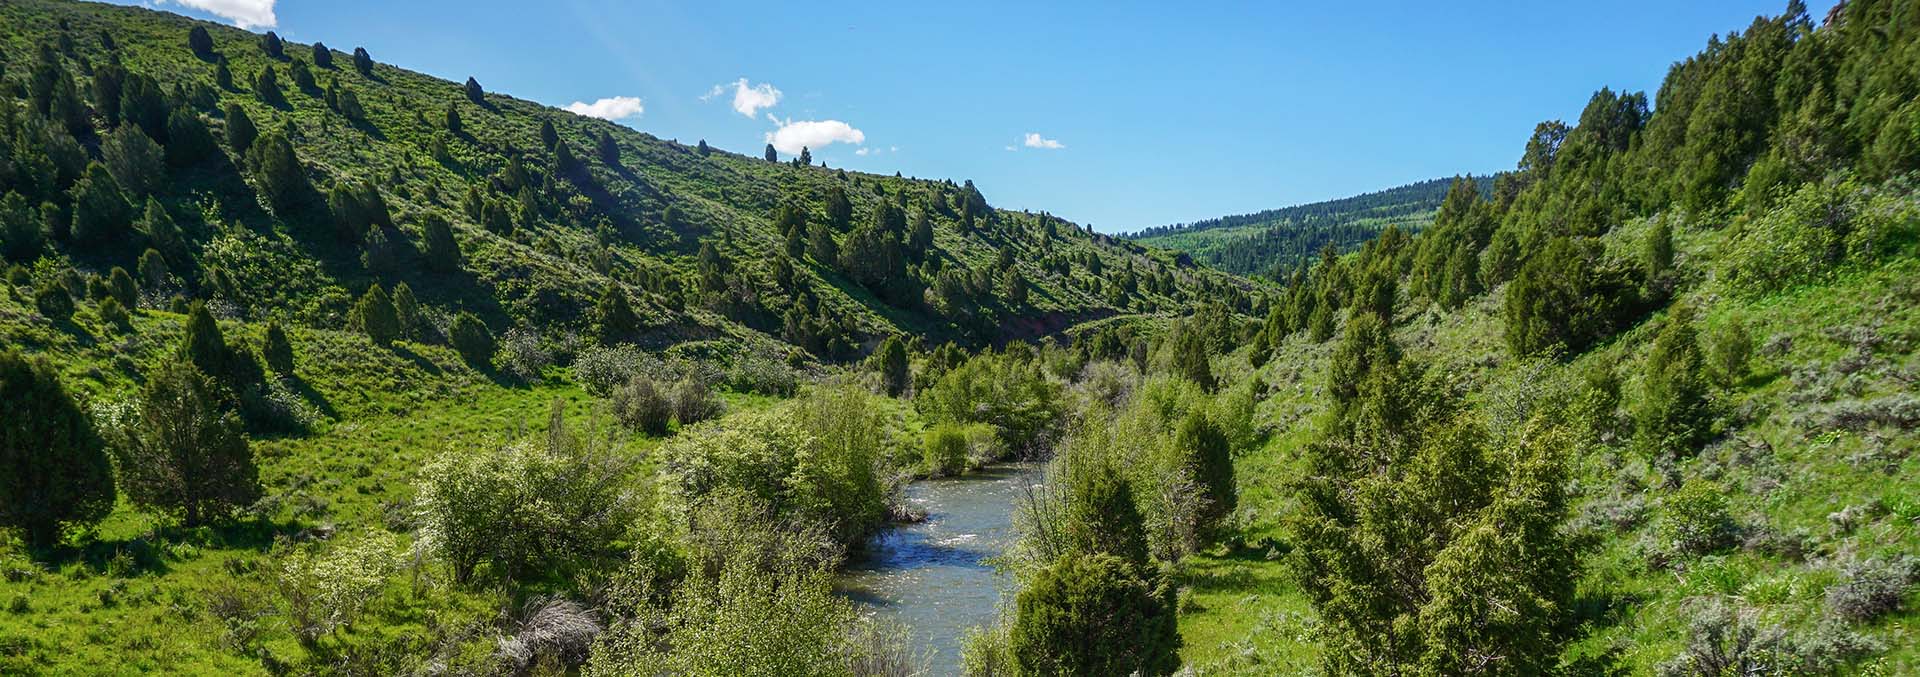 idaho ranches for sale heart l ranch